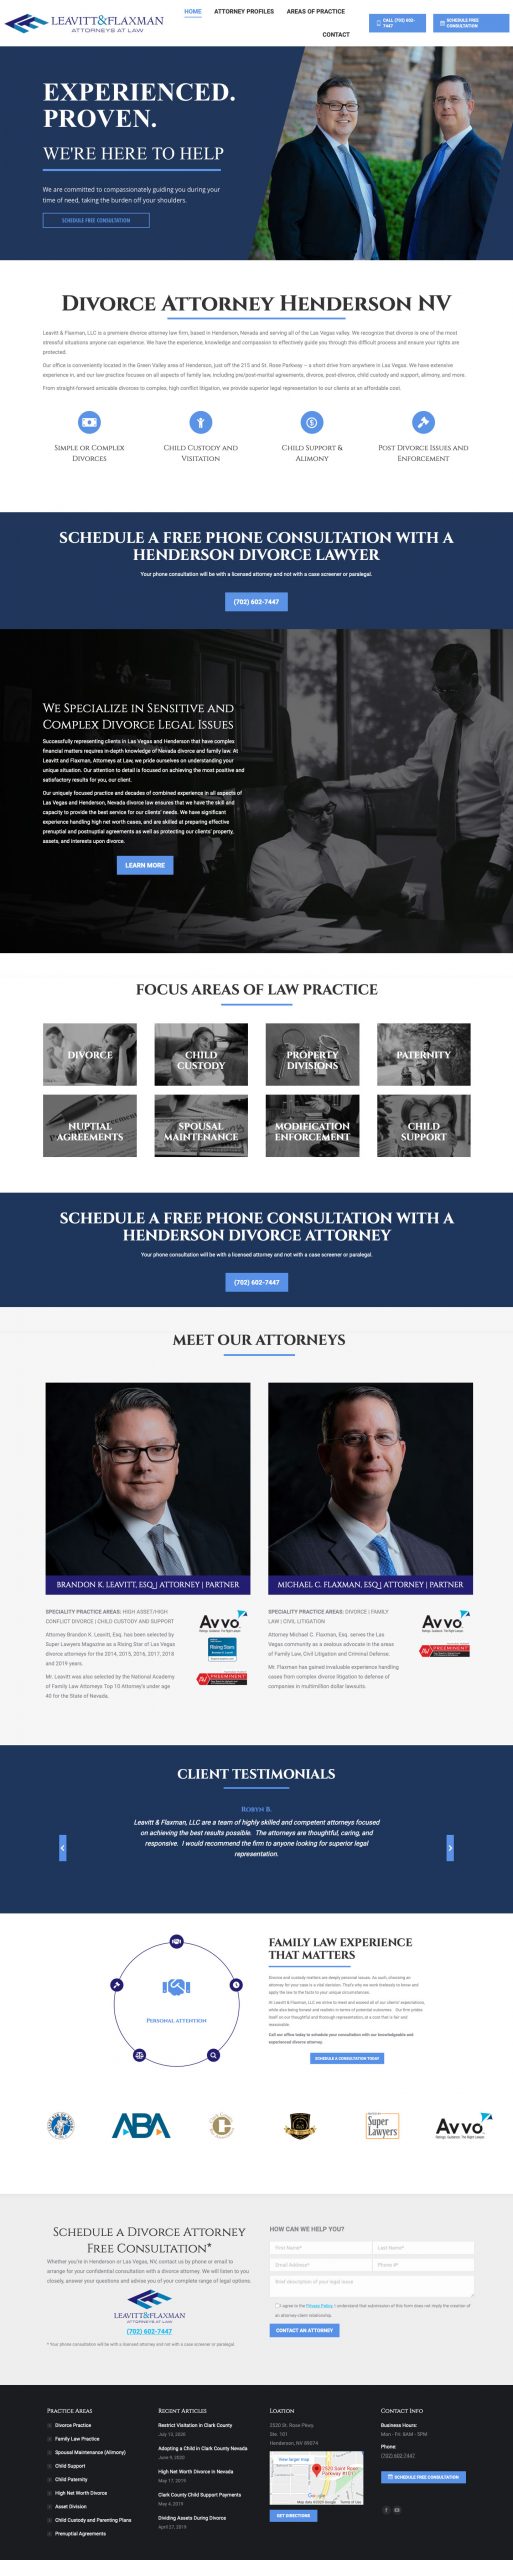 Family Law Firm Website Design